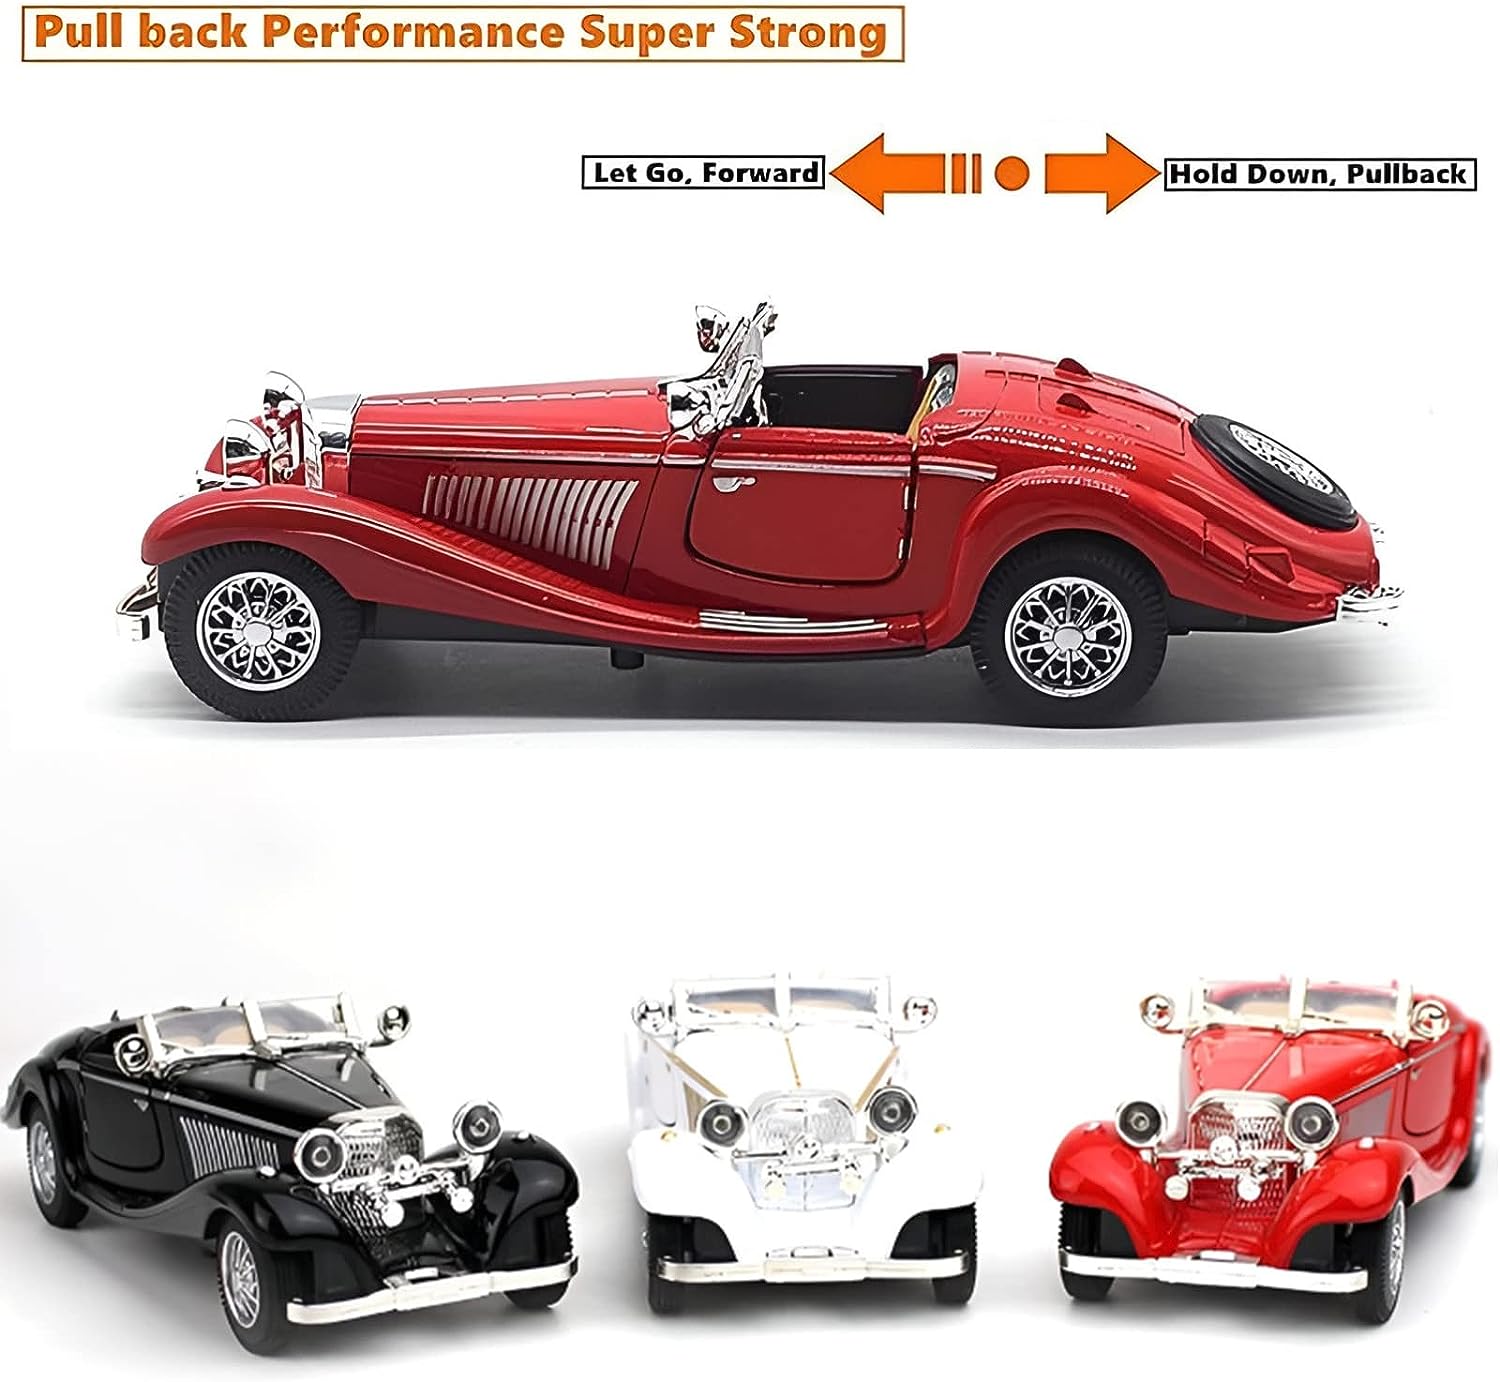 128 scale pullback diecast metal antique classic model cars collectible toy gifts redlength 65in168cm review